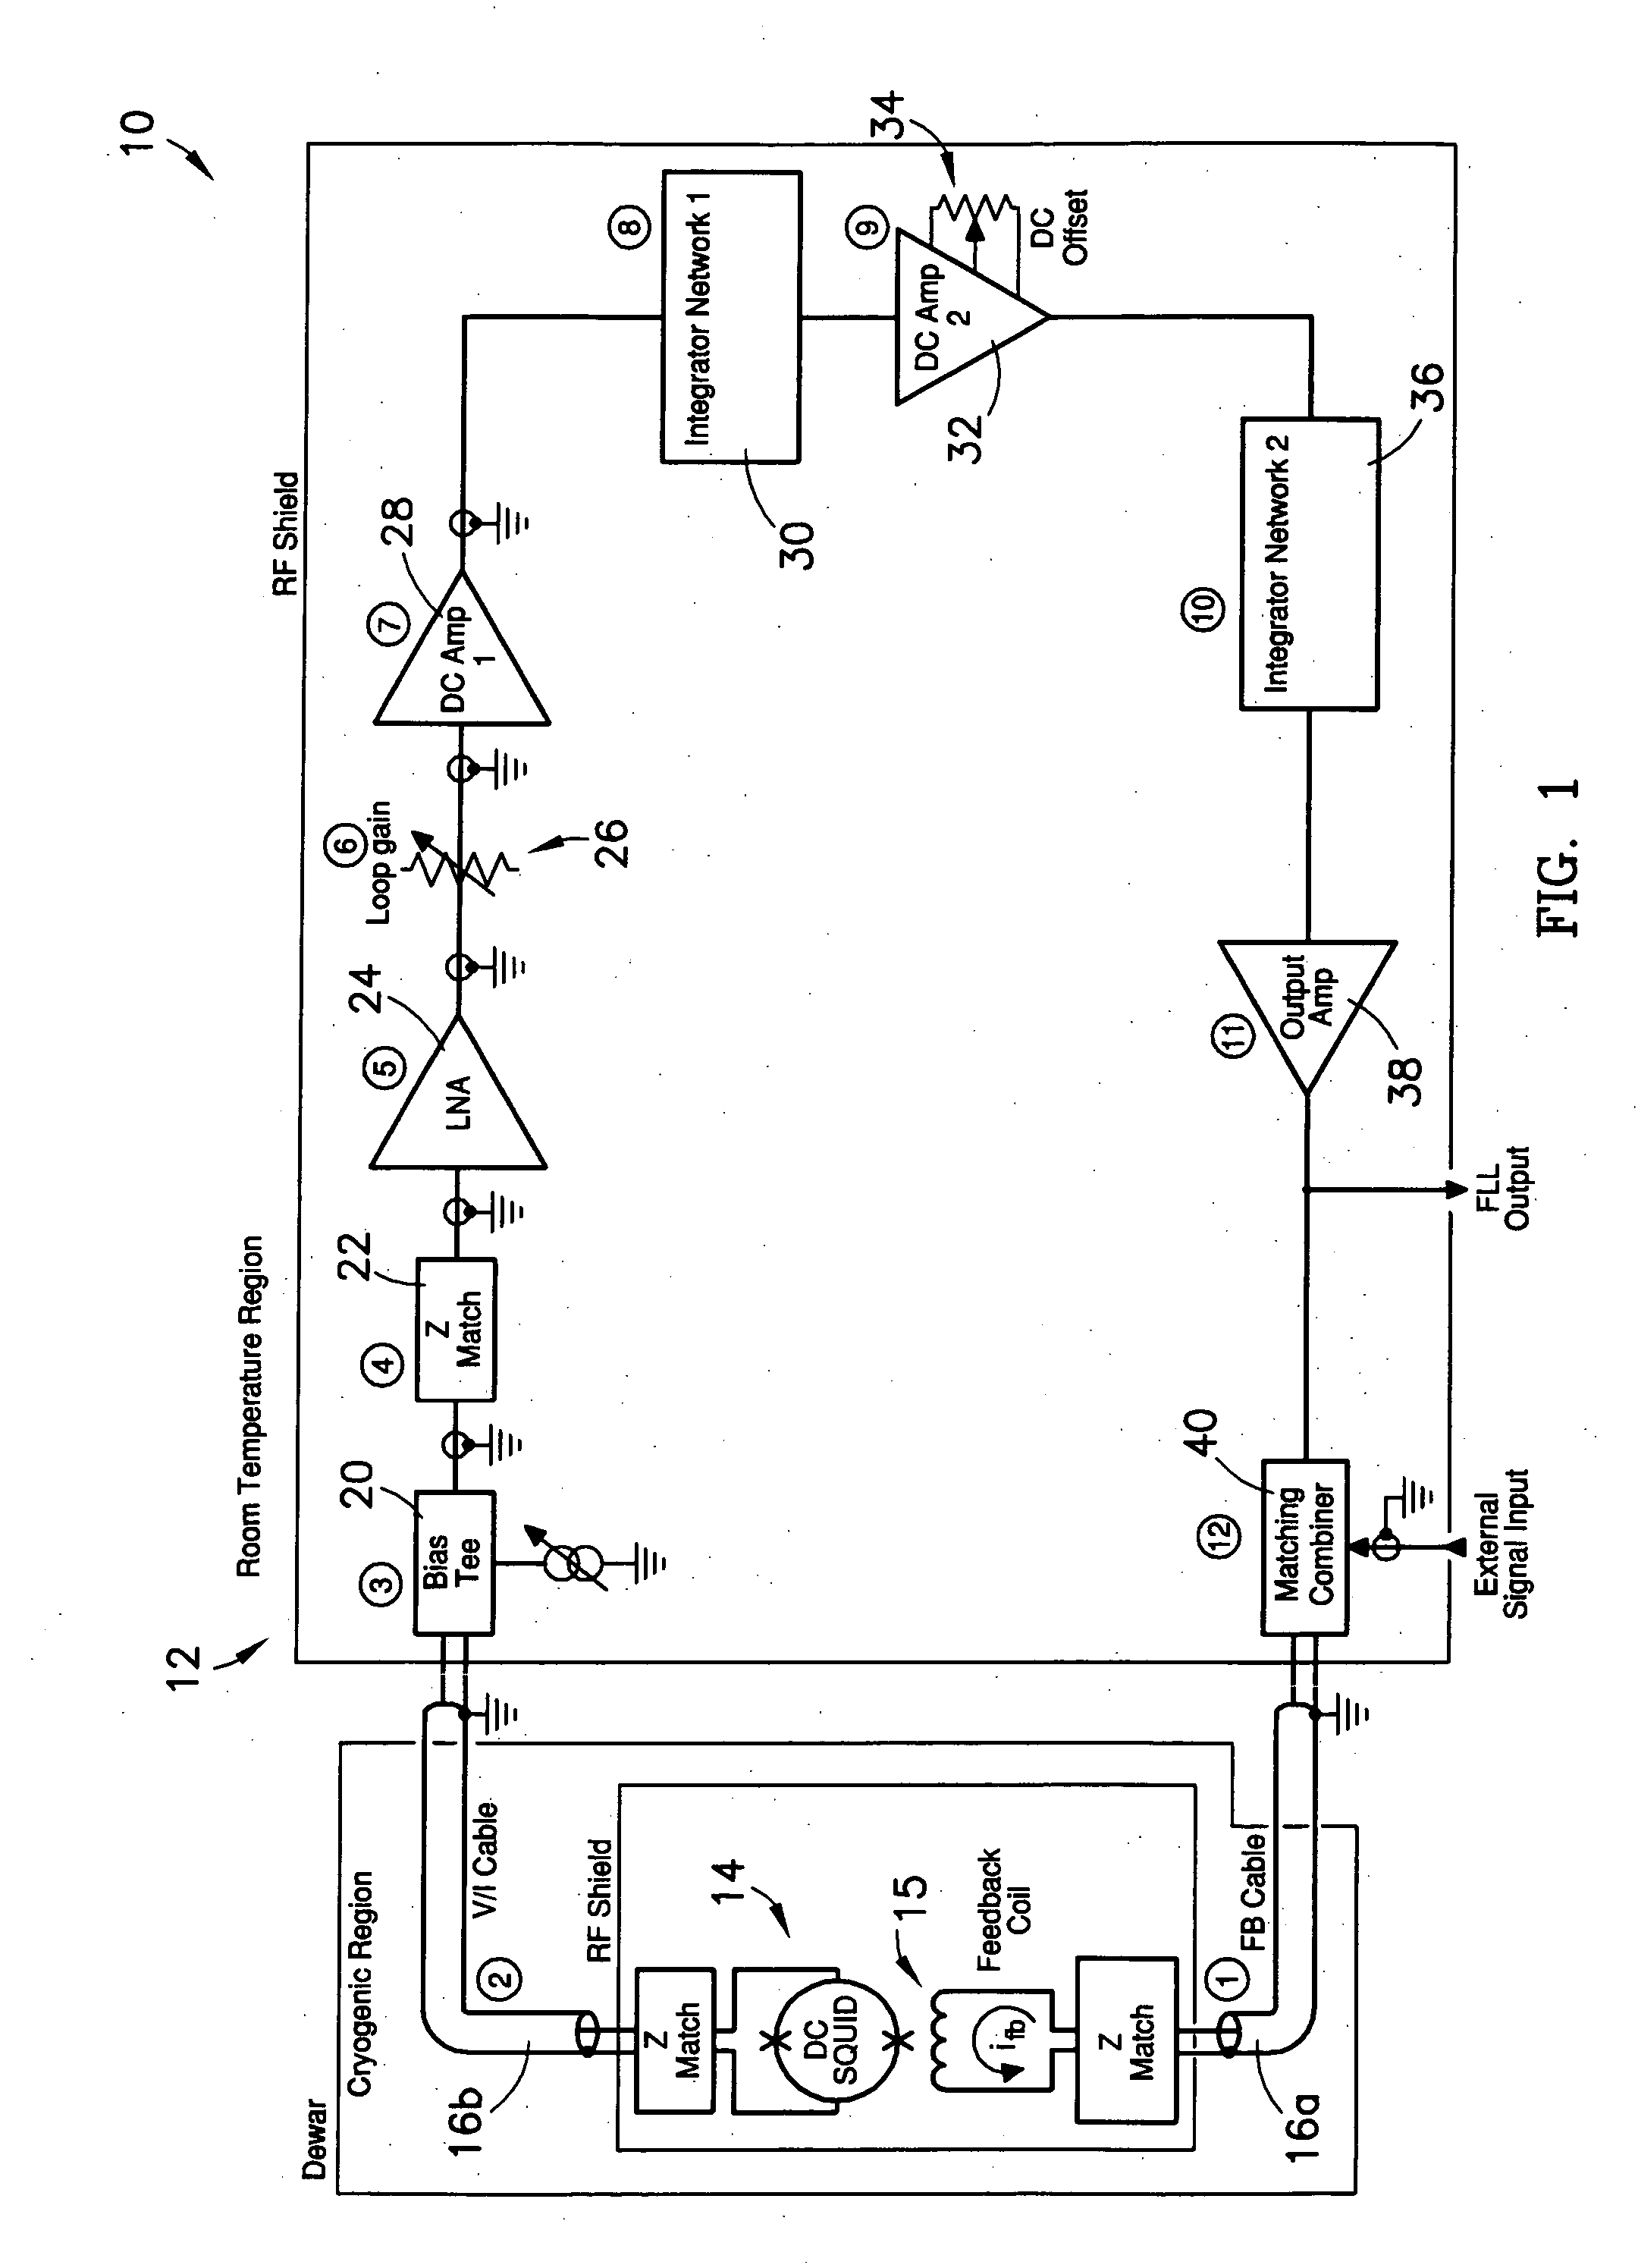 System having unmodulated flux locked loop for measuring magnetic fields